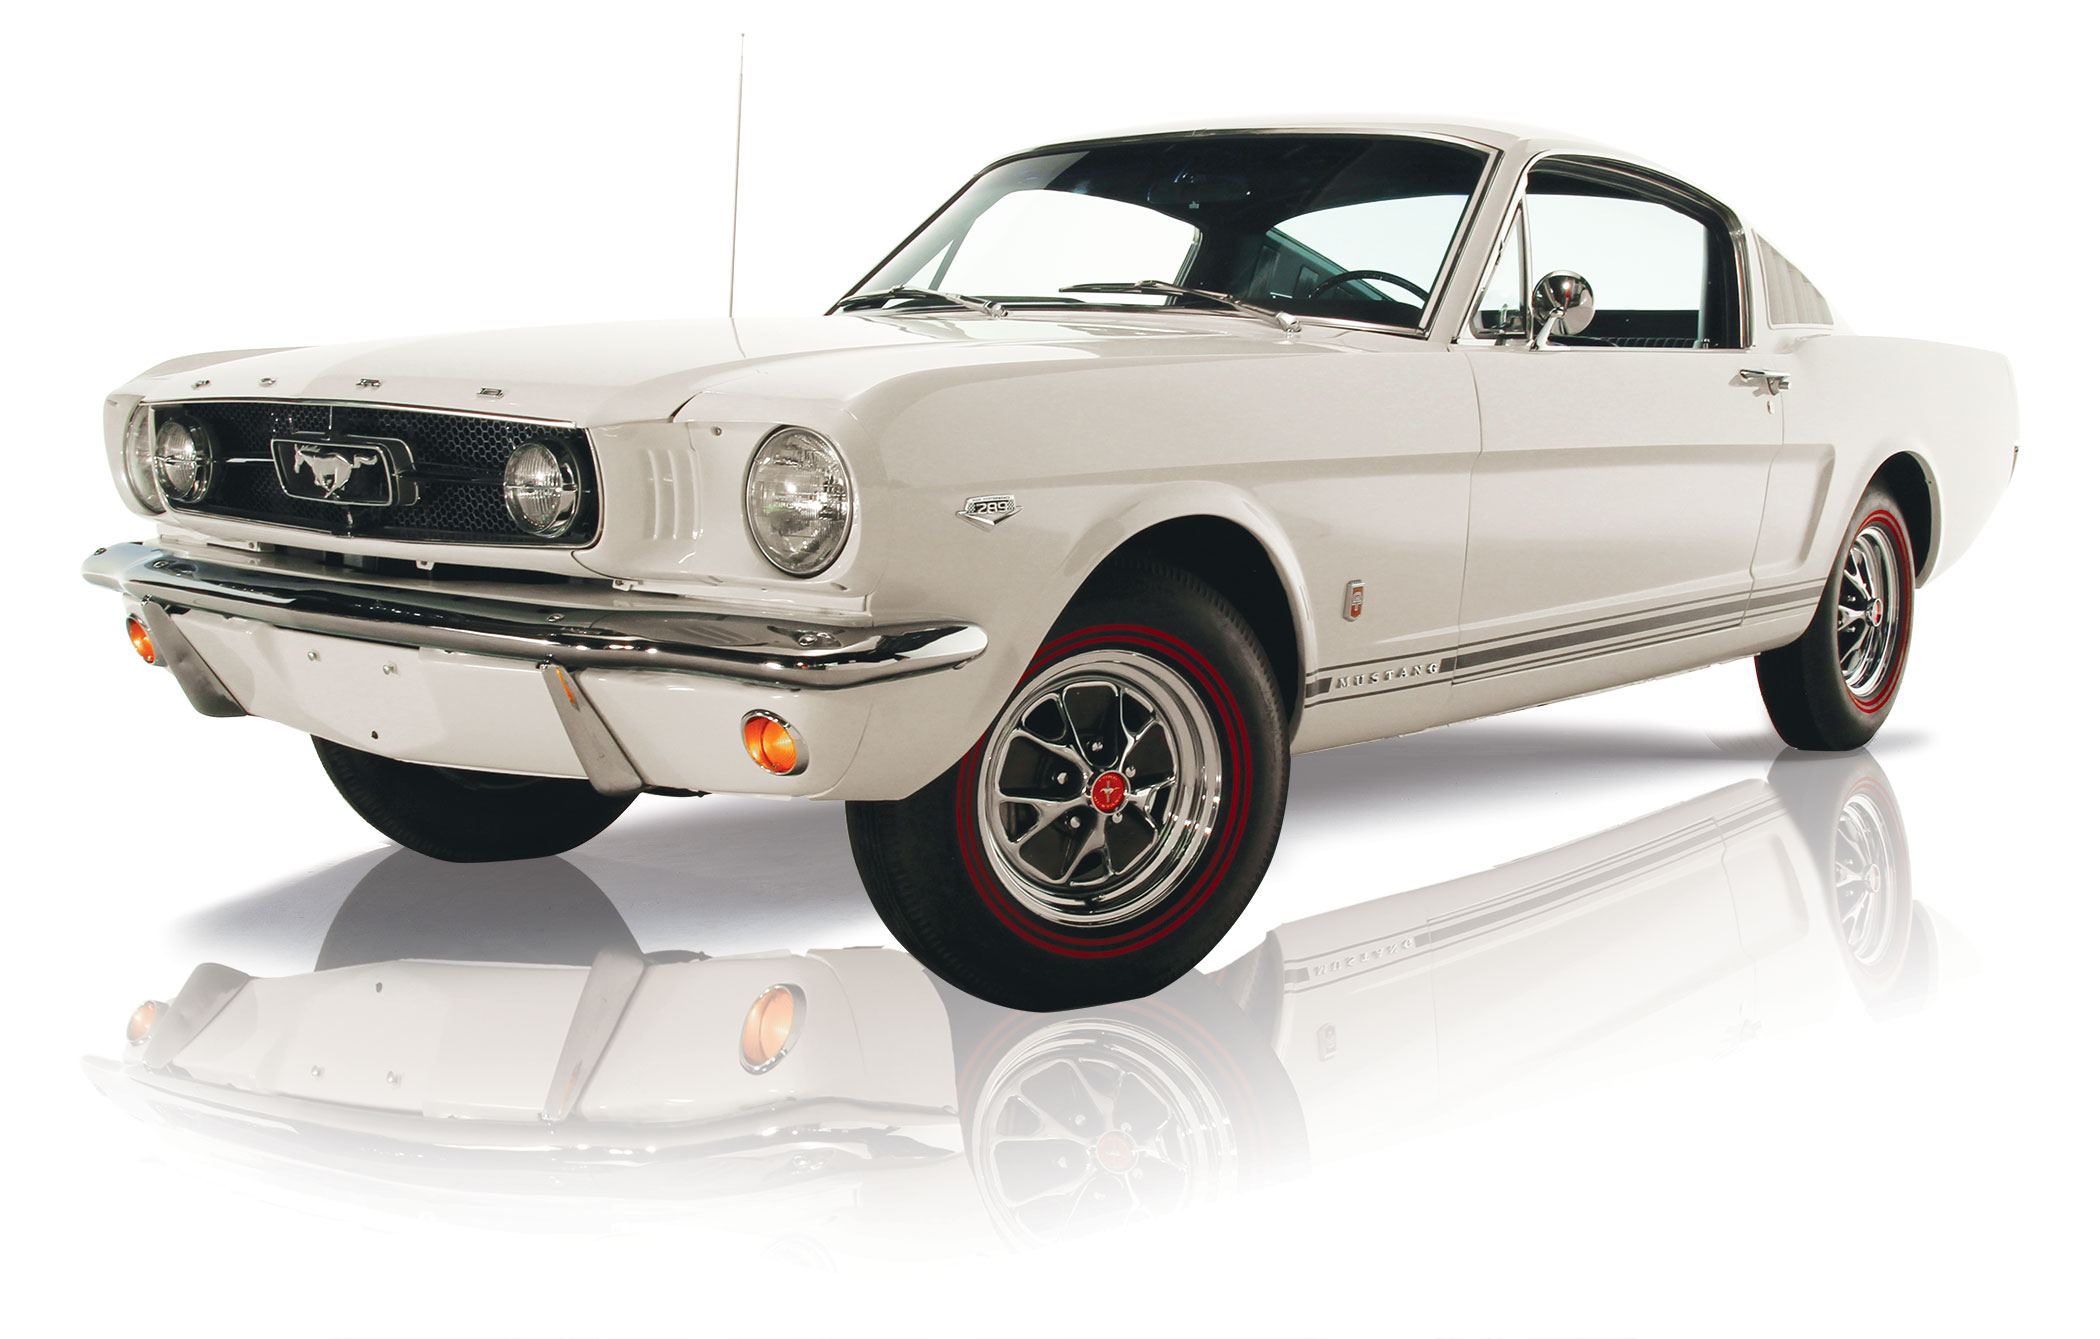 Gallery Images of 65 Mustang Pic.